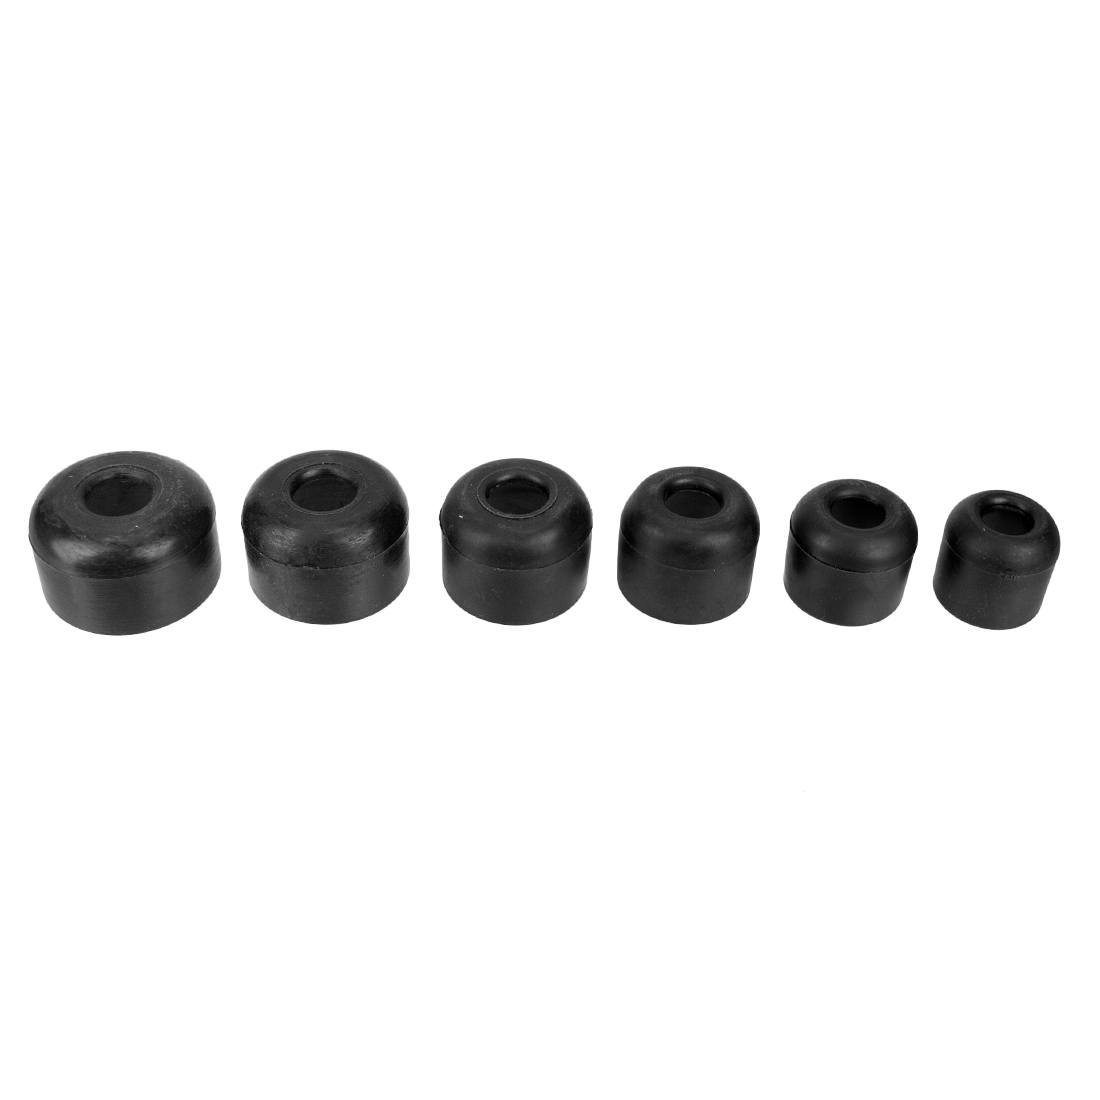 XERO Base Cap - For Plus and Glue-On Style Poles All Sizes Top View